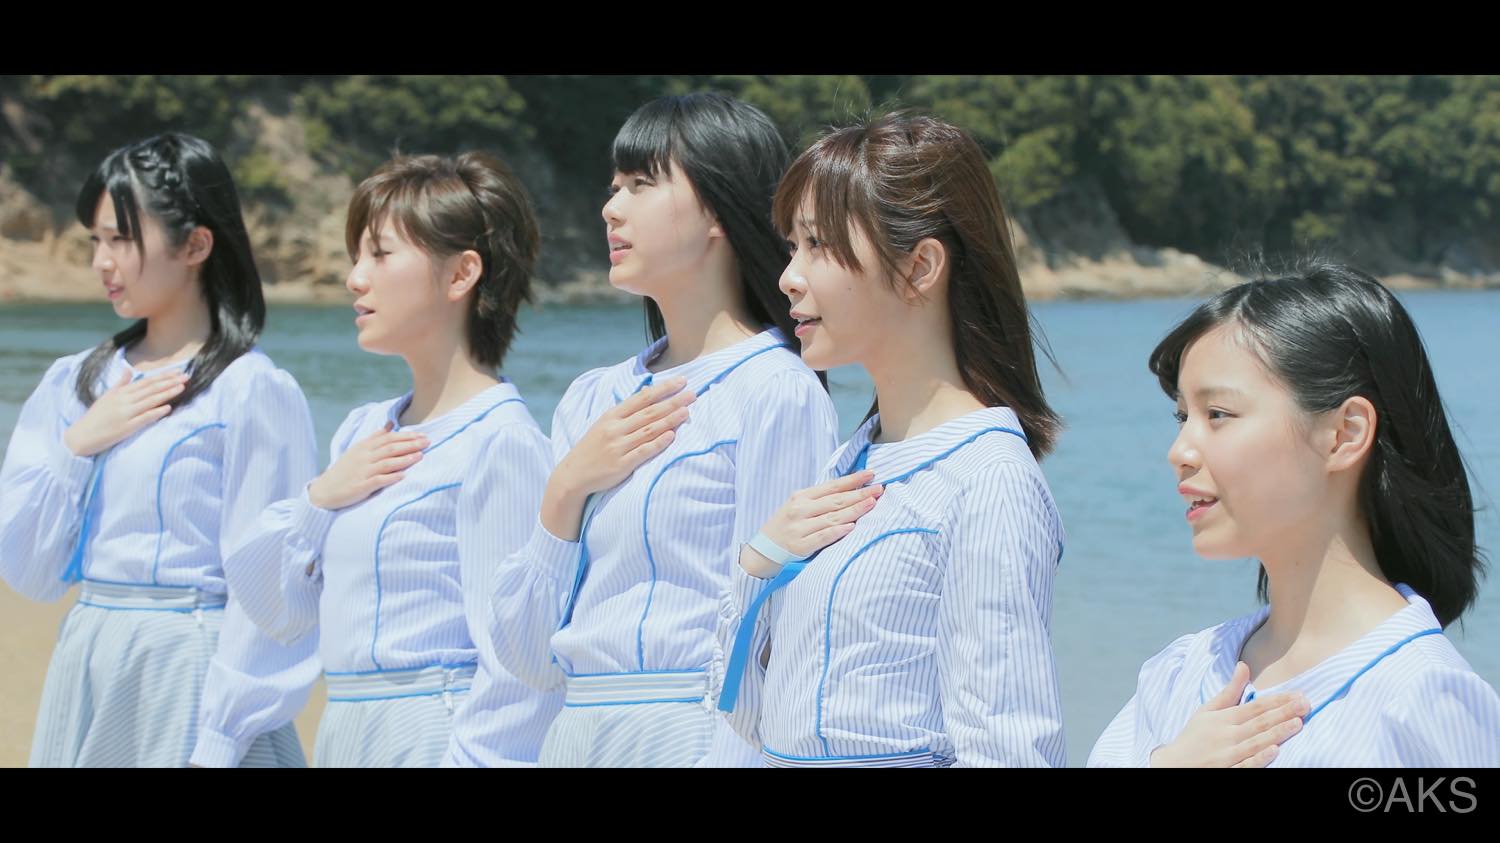 STU48 Set Sail for Japan’s Inland Sea in the MV for “Setouchi no Koe”